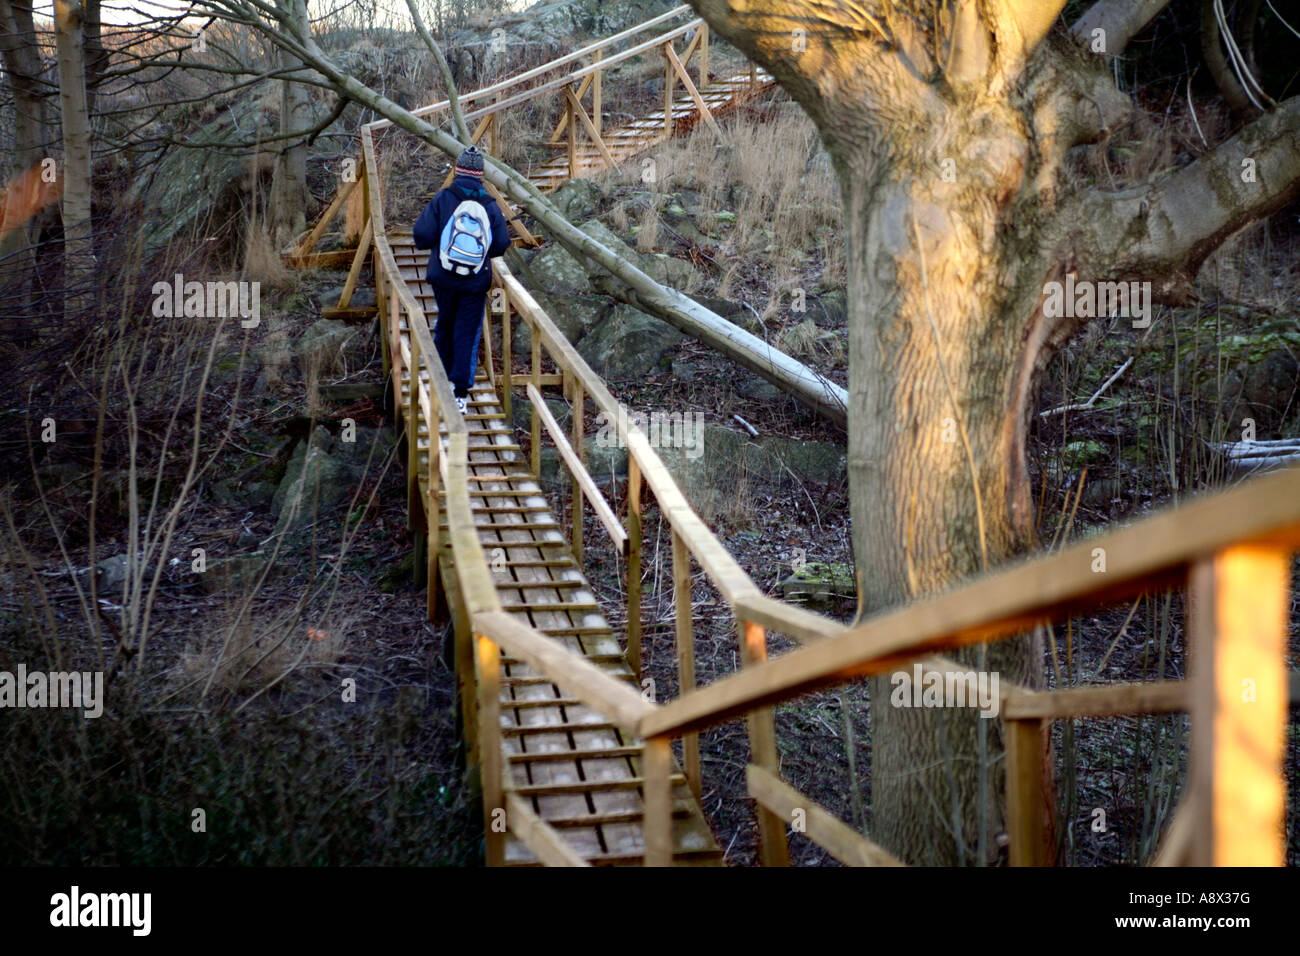 A solitary person walking on a wooden bridge  traversing over swampy terrain Stock Photo